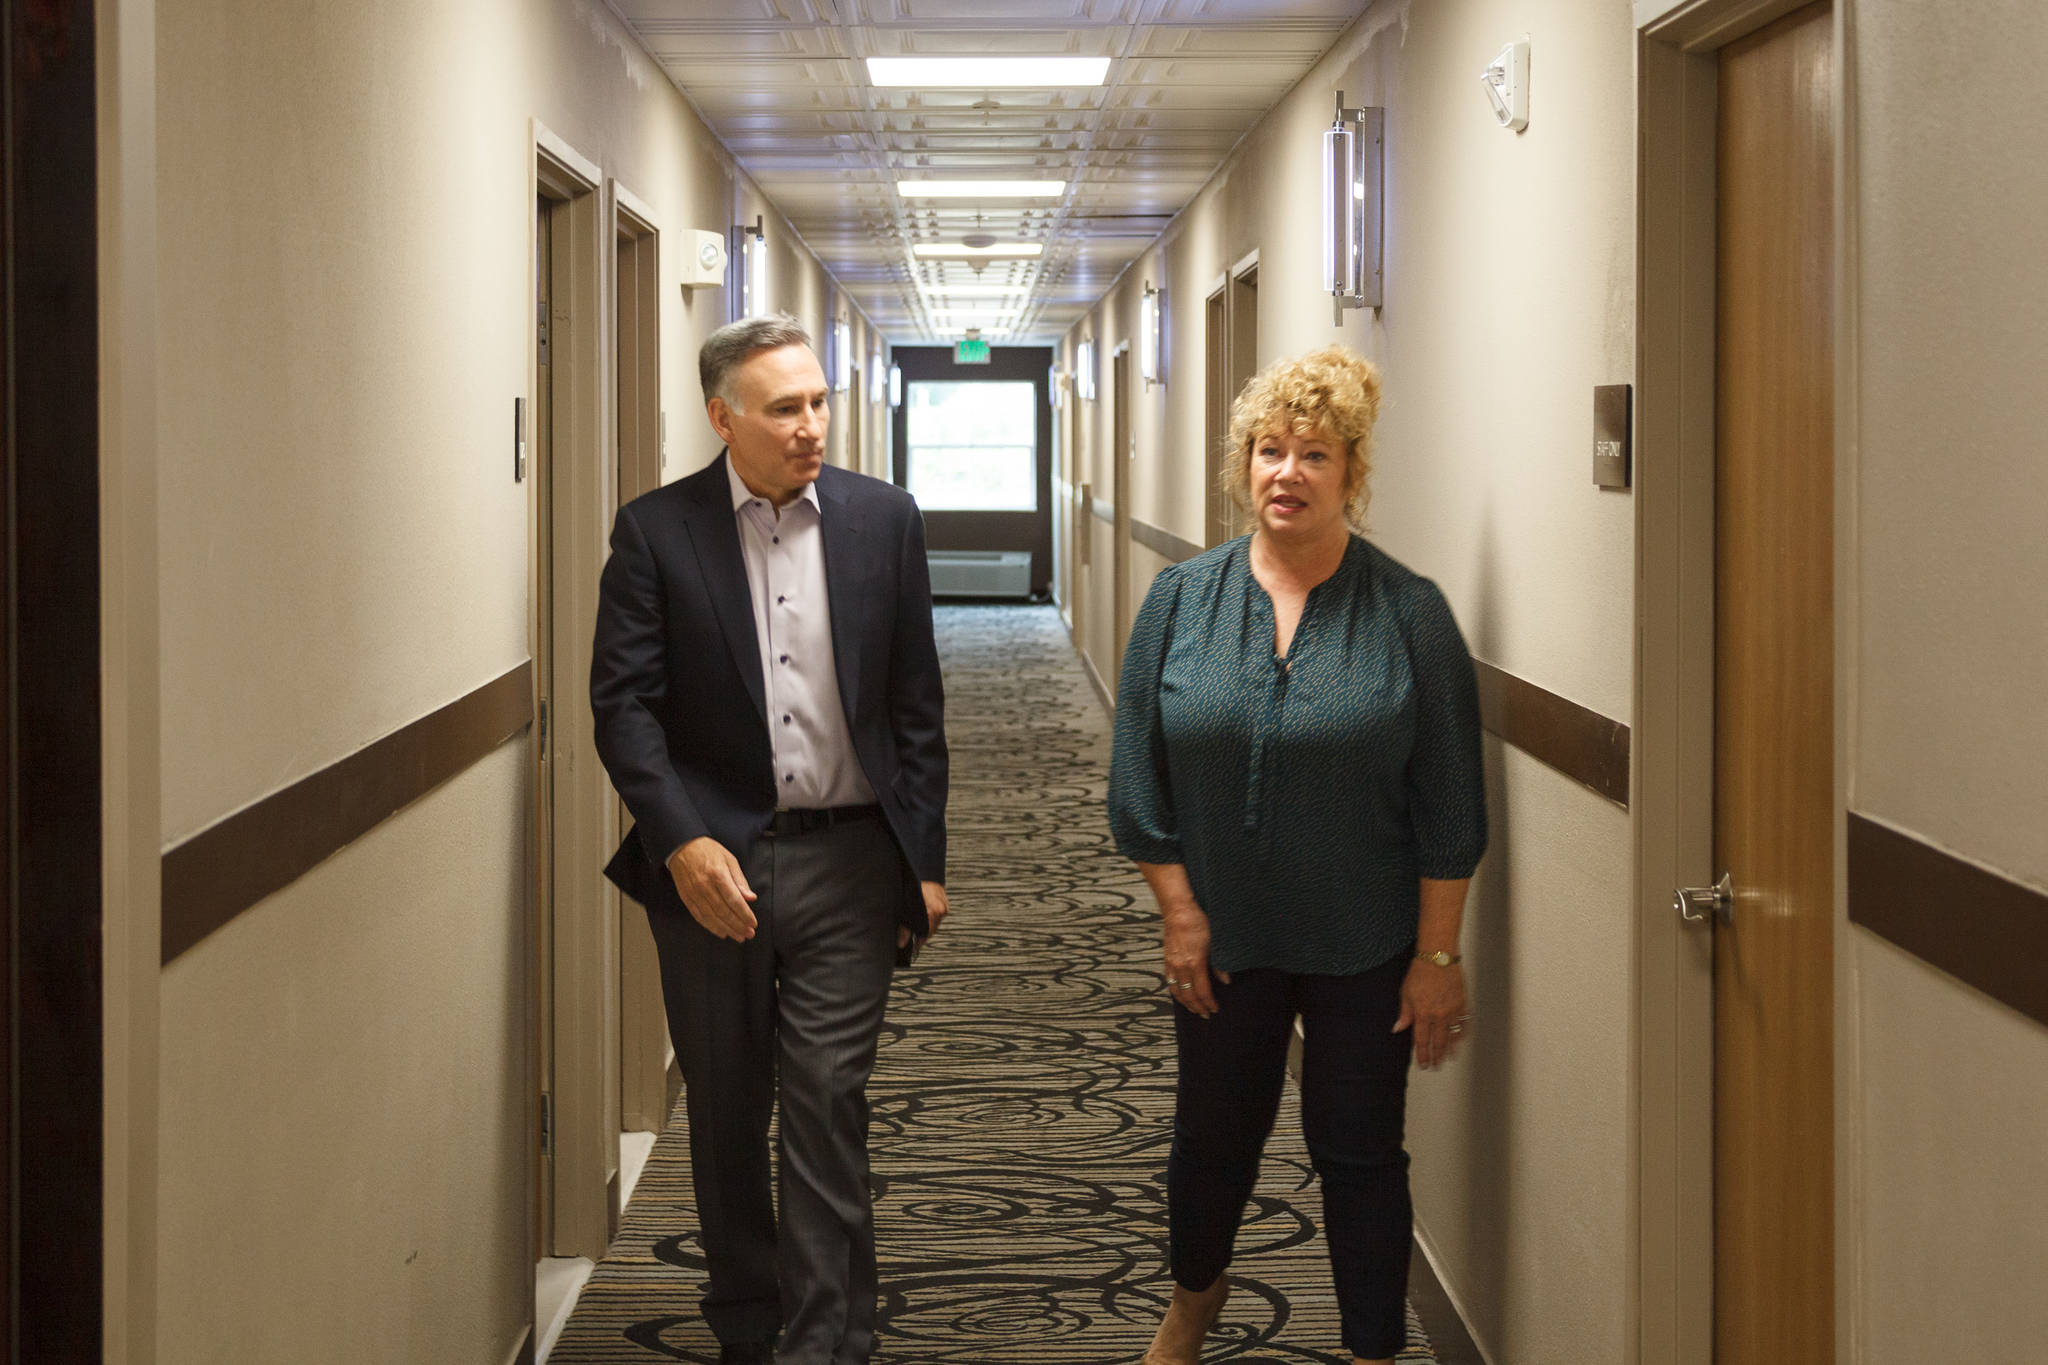 King County Executive Dow Constantine and Auburn Mayor Nancy Backus tour the Clarion Hotel in Auburn on Tuesday, July 20. The hotel will be used to house approximately 100 people experiencing homelessness in the area as part of the county’s Health Through Housing program. Photo by Henry Stewart-Wood/Auburn Reporter